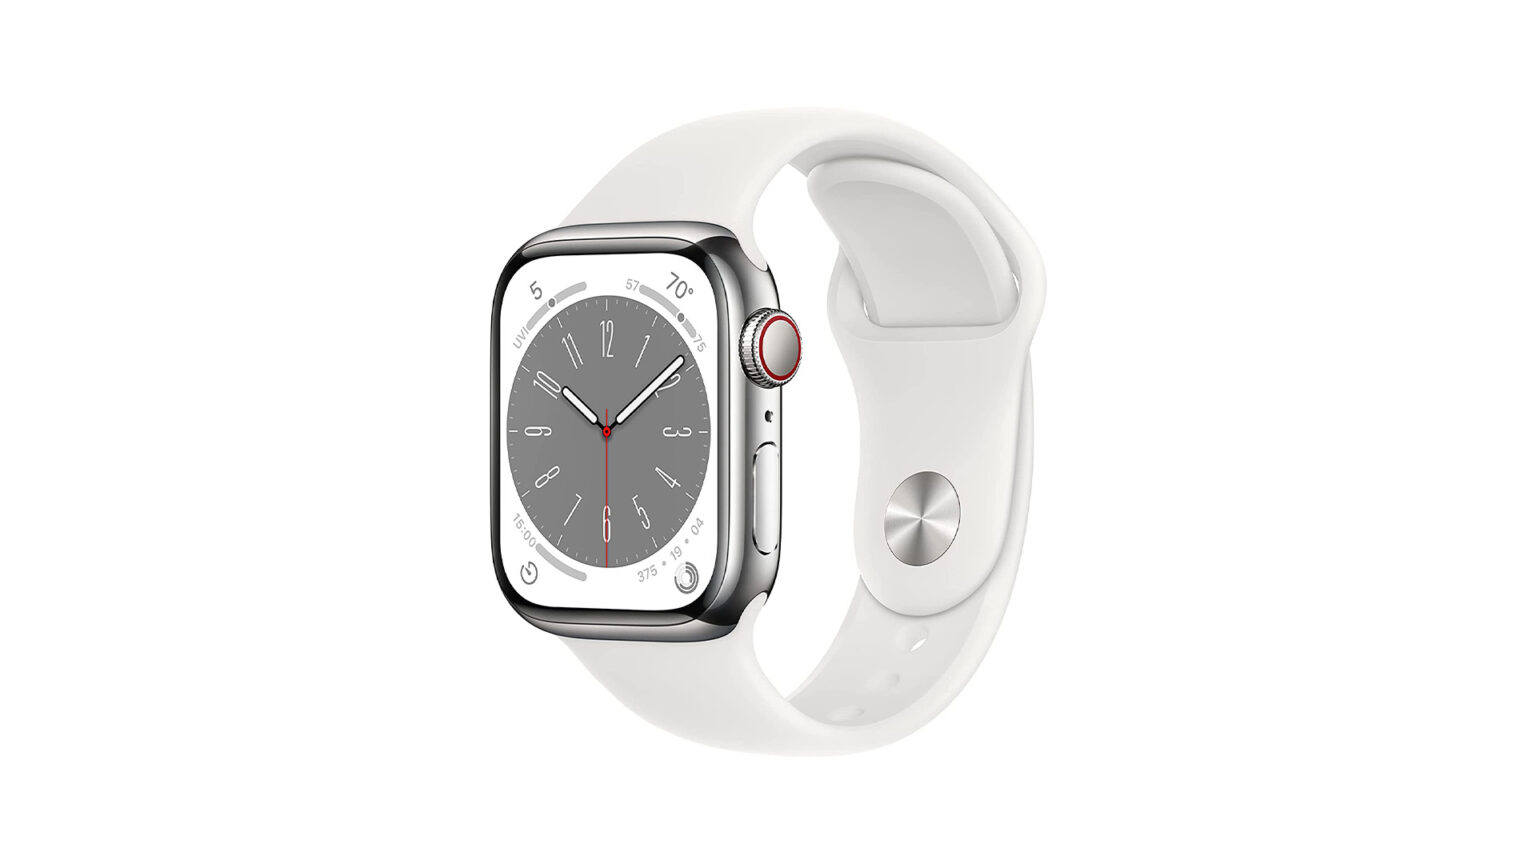 Apple Watch Series 4 (GPS + Cellulare) Bianco